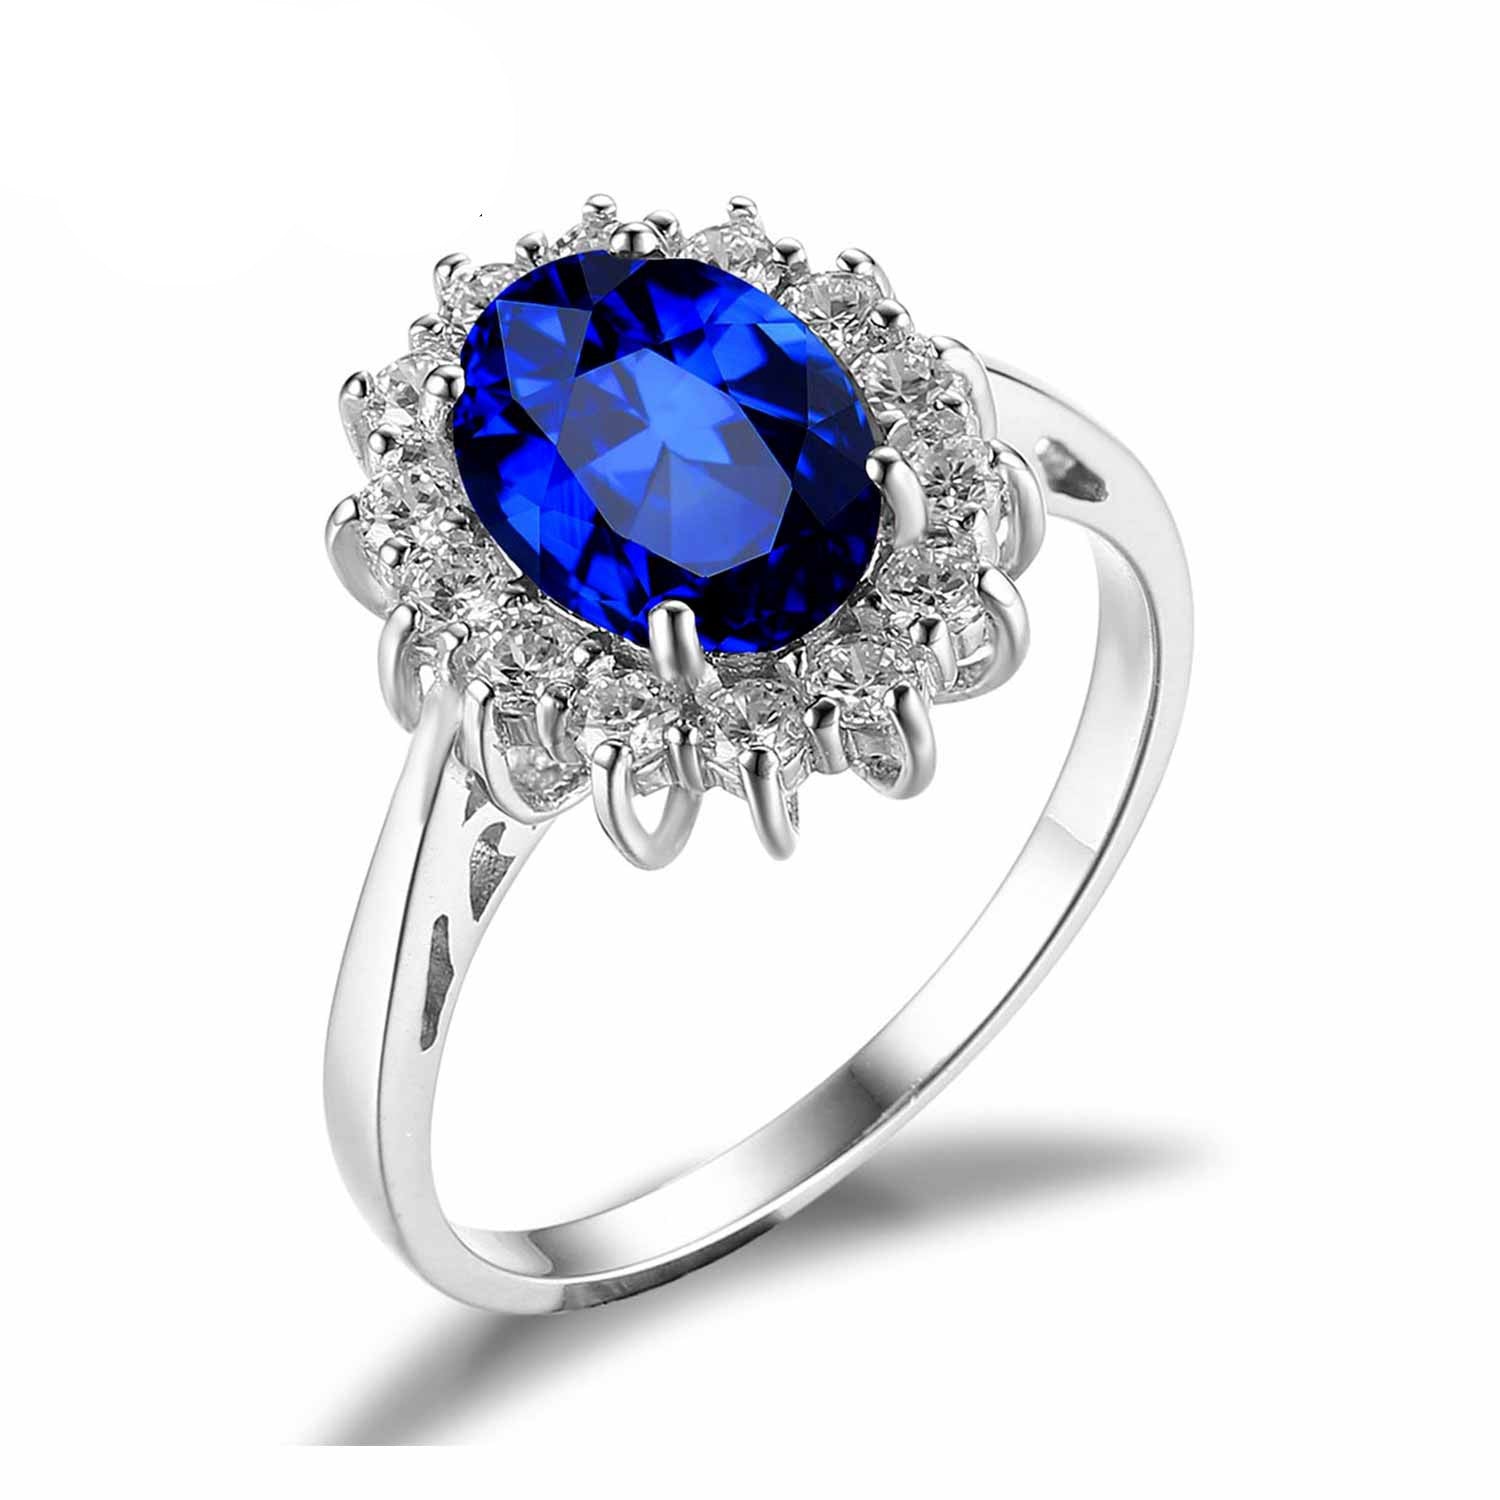 Princess Diana William Kate Middleton's 3.2ct Created Blue Sapphire Engagement 925 Sterling Silver Ring For Women - CelebritystyleFashion.com.au online clothing shop australia